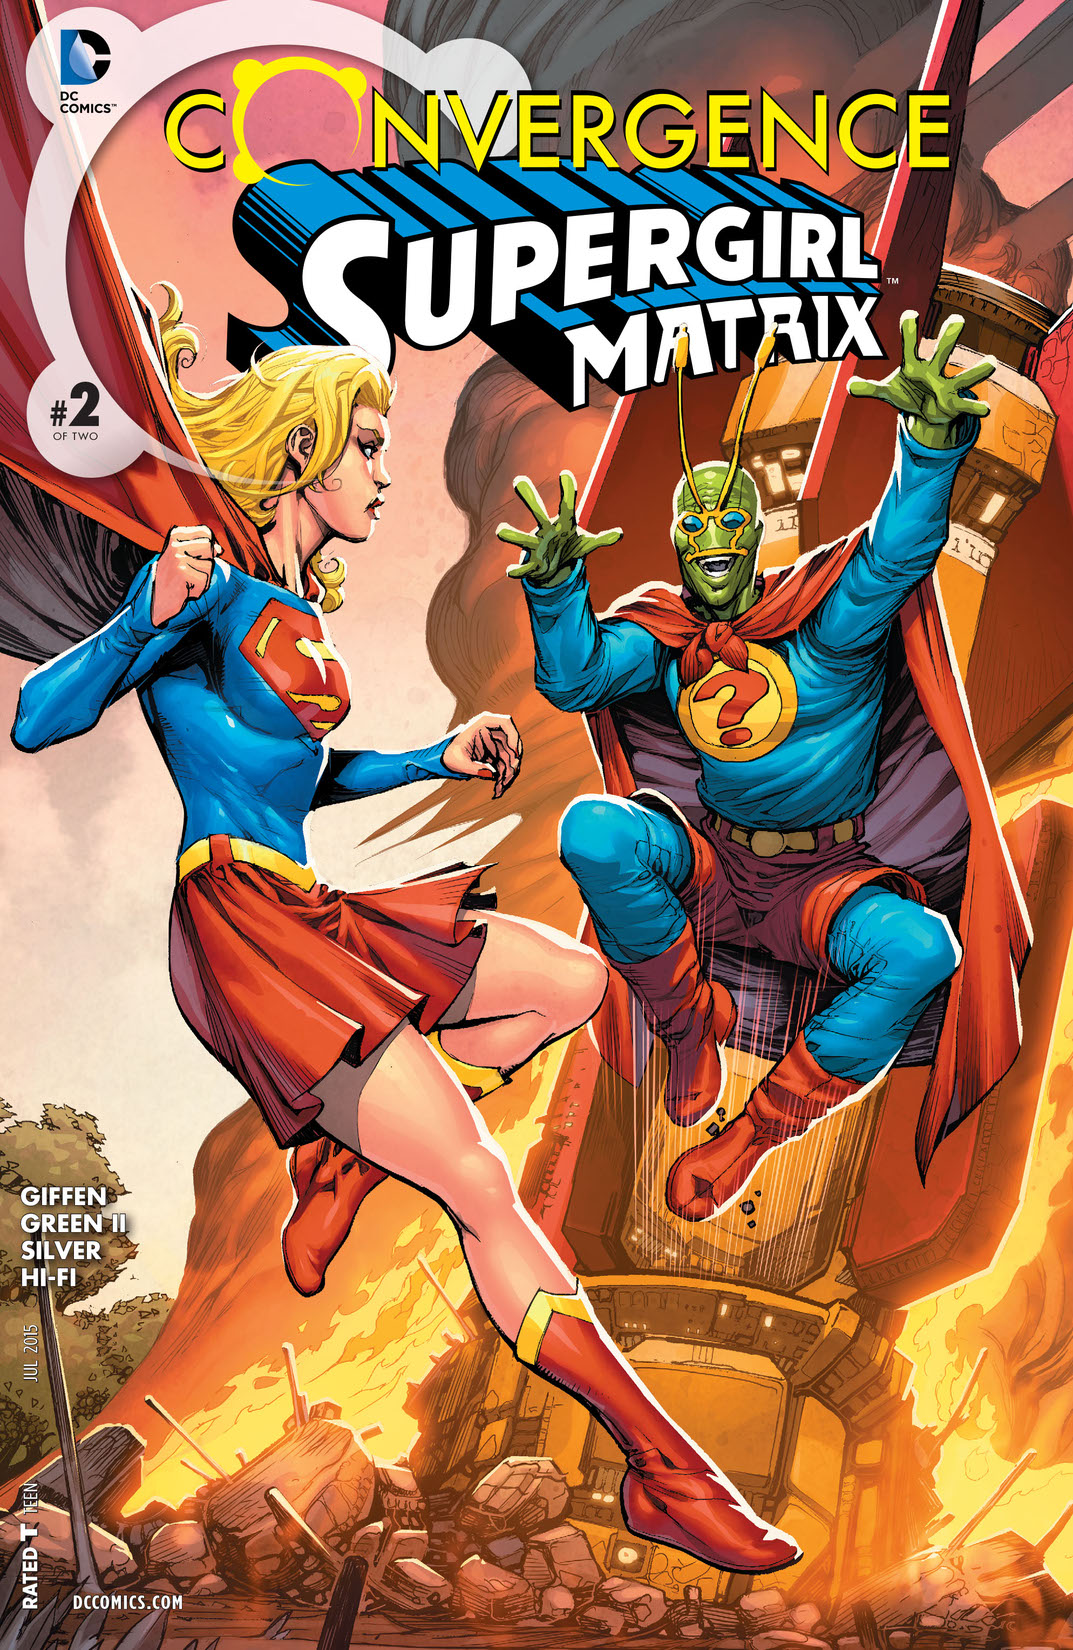 Convergence: Supergirl: Matrix #2 preview images